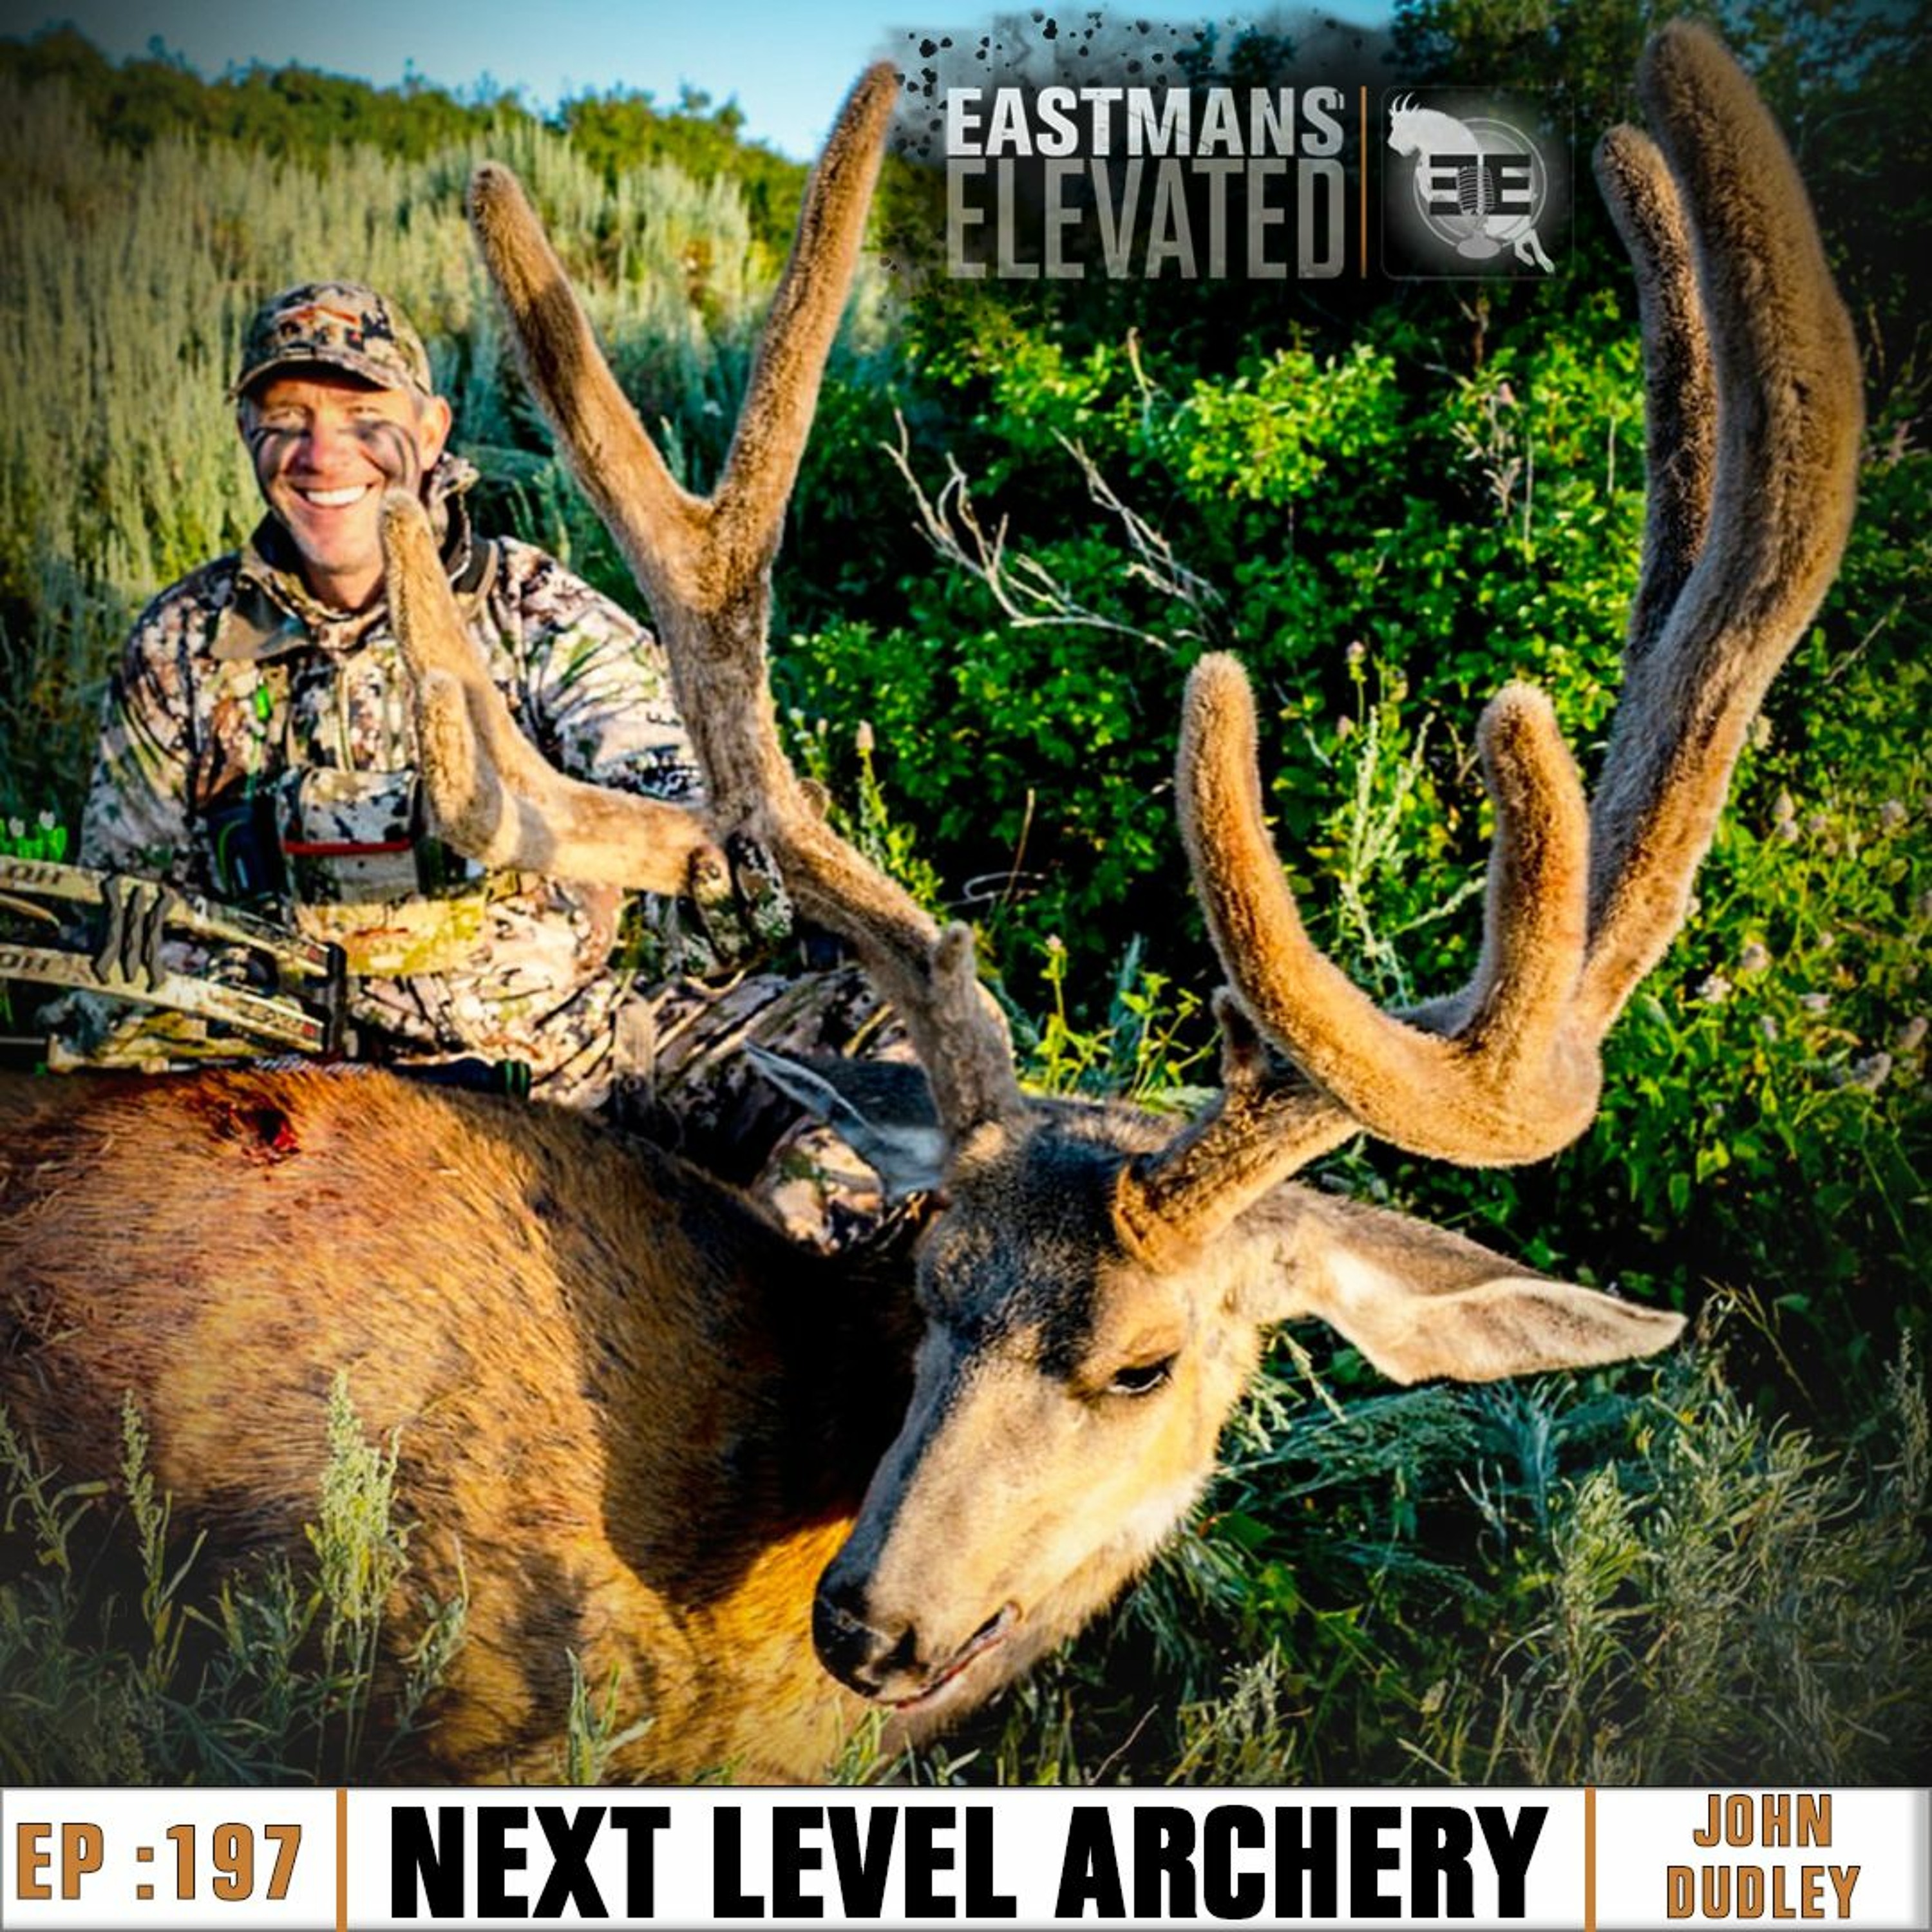 Episode 197: Next Level Archery with John Dudley